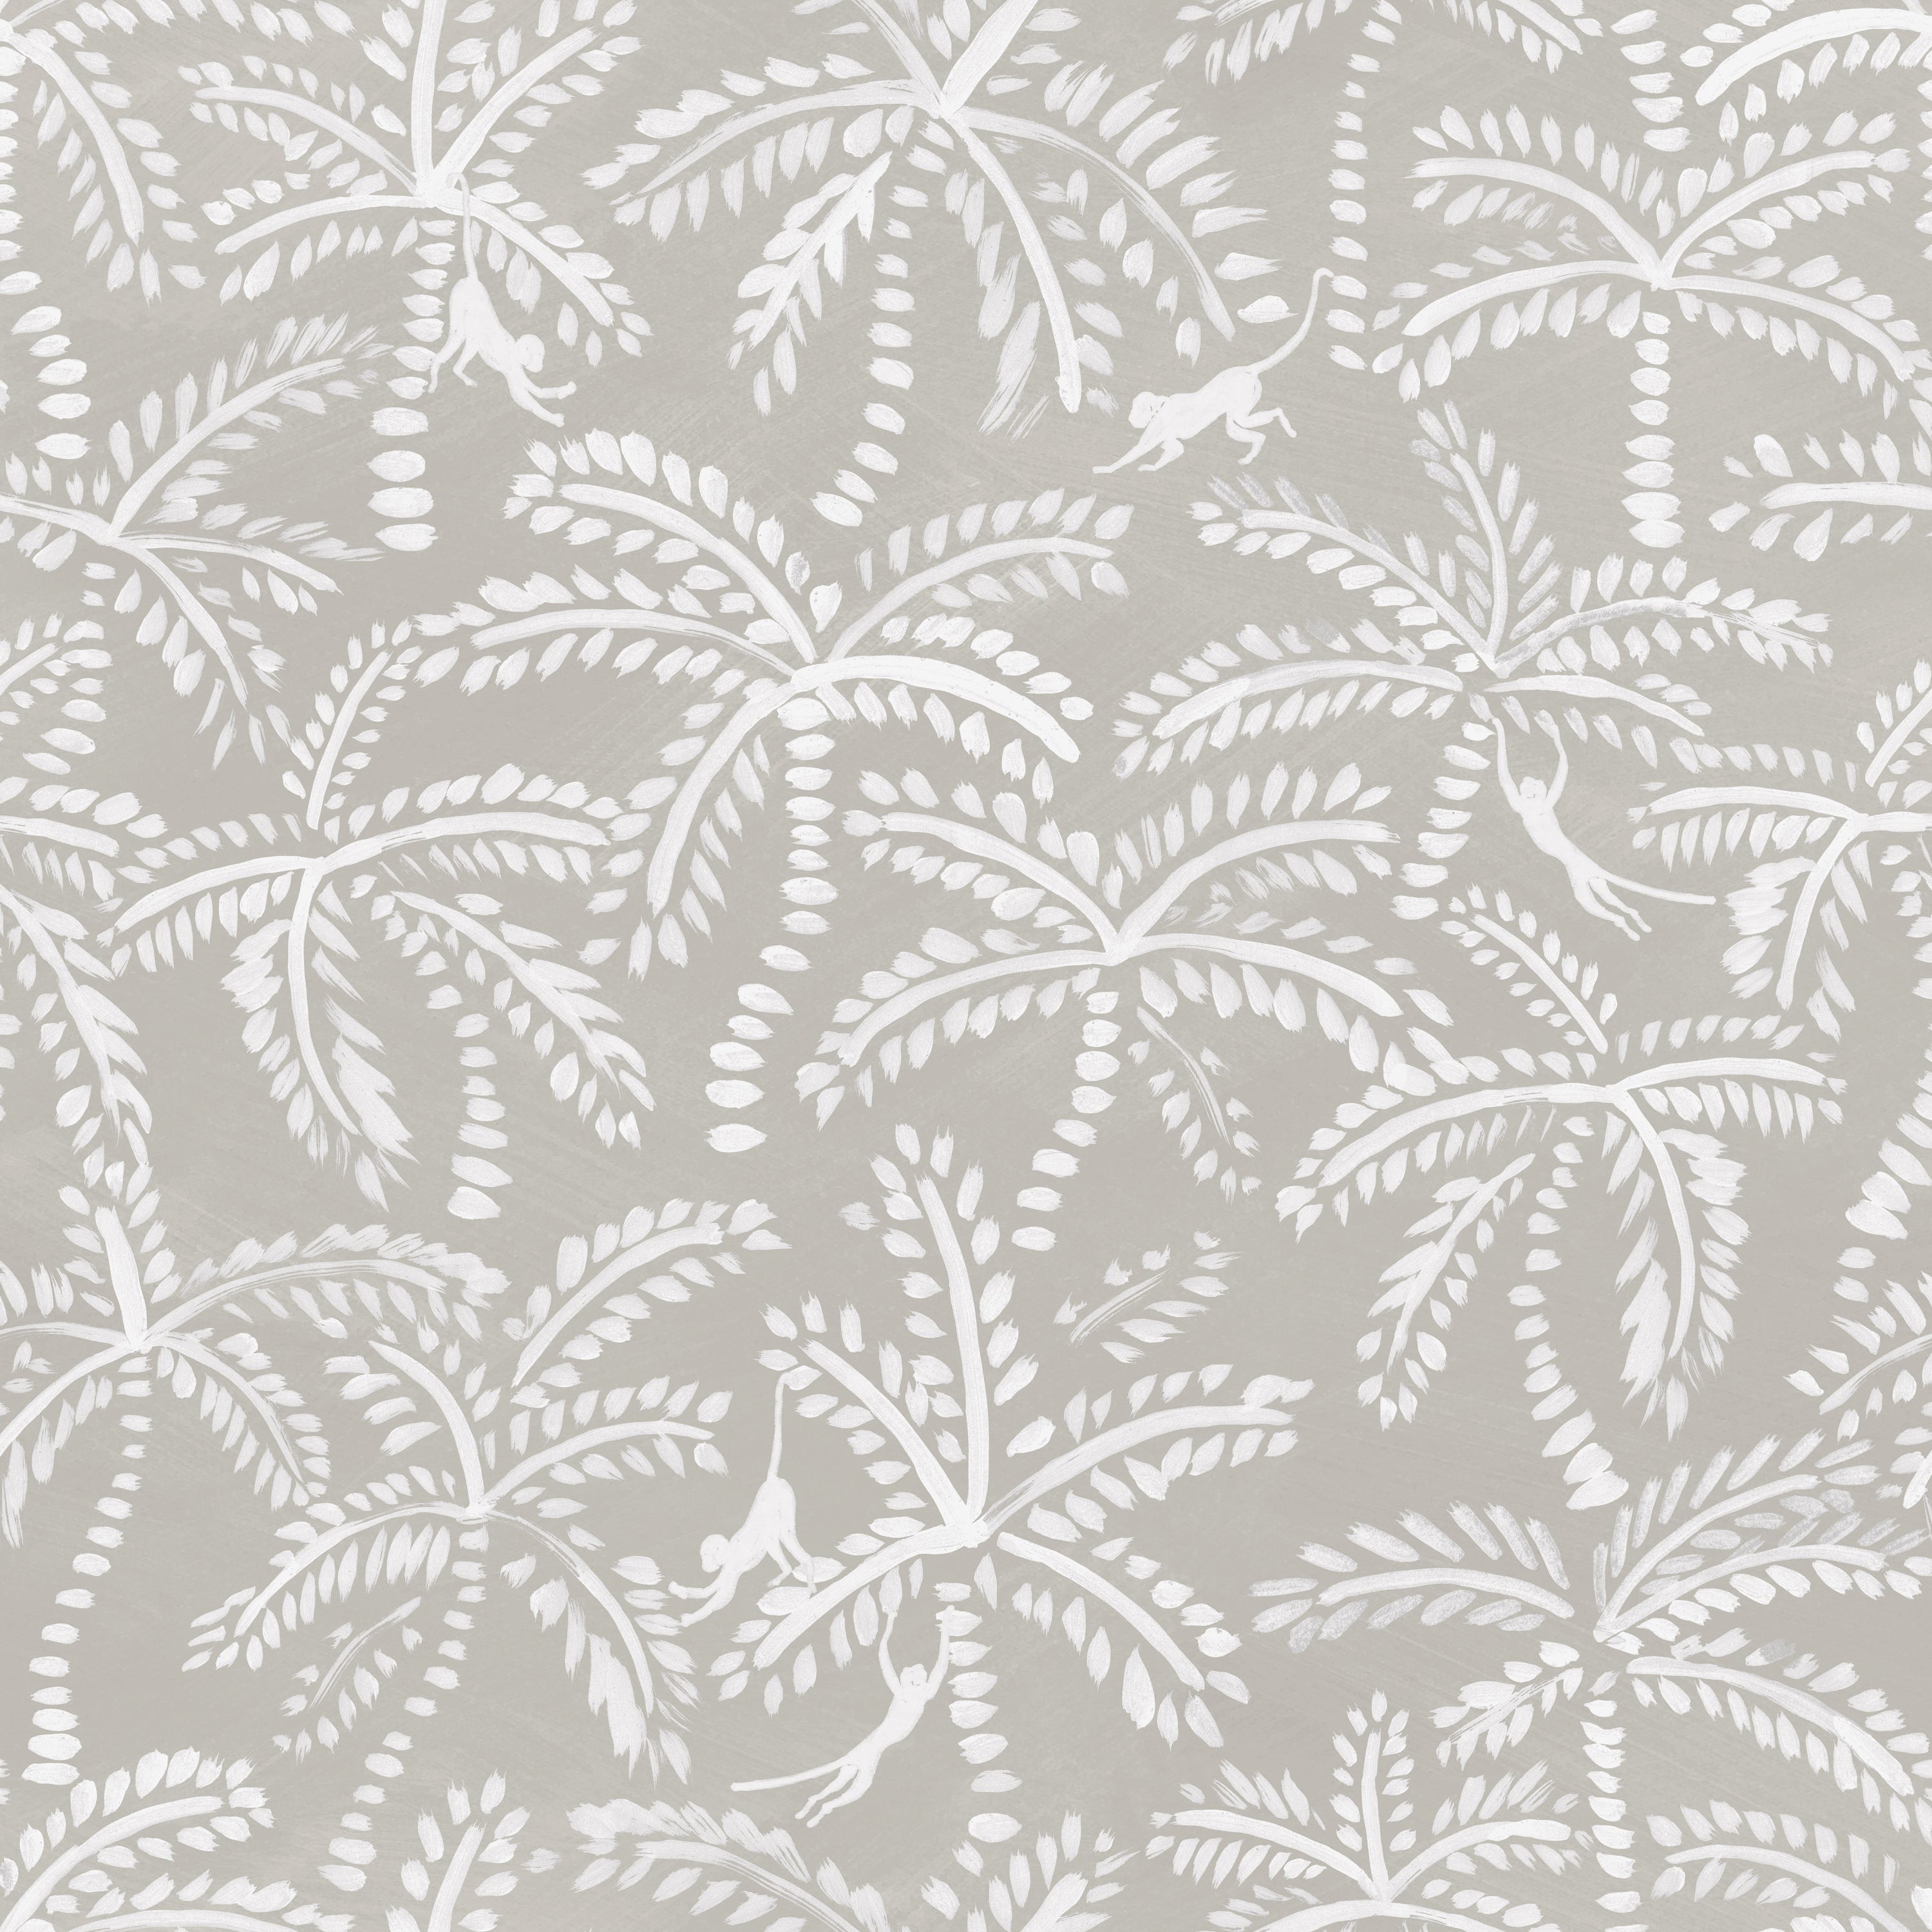 Detail of wallpaper in a playful palm tree and monkey print in white on a light gray field.